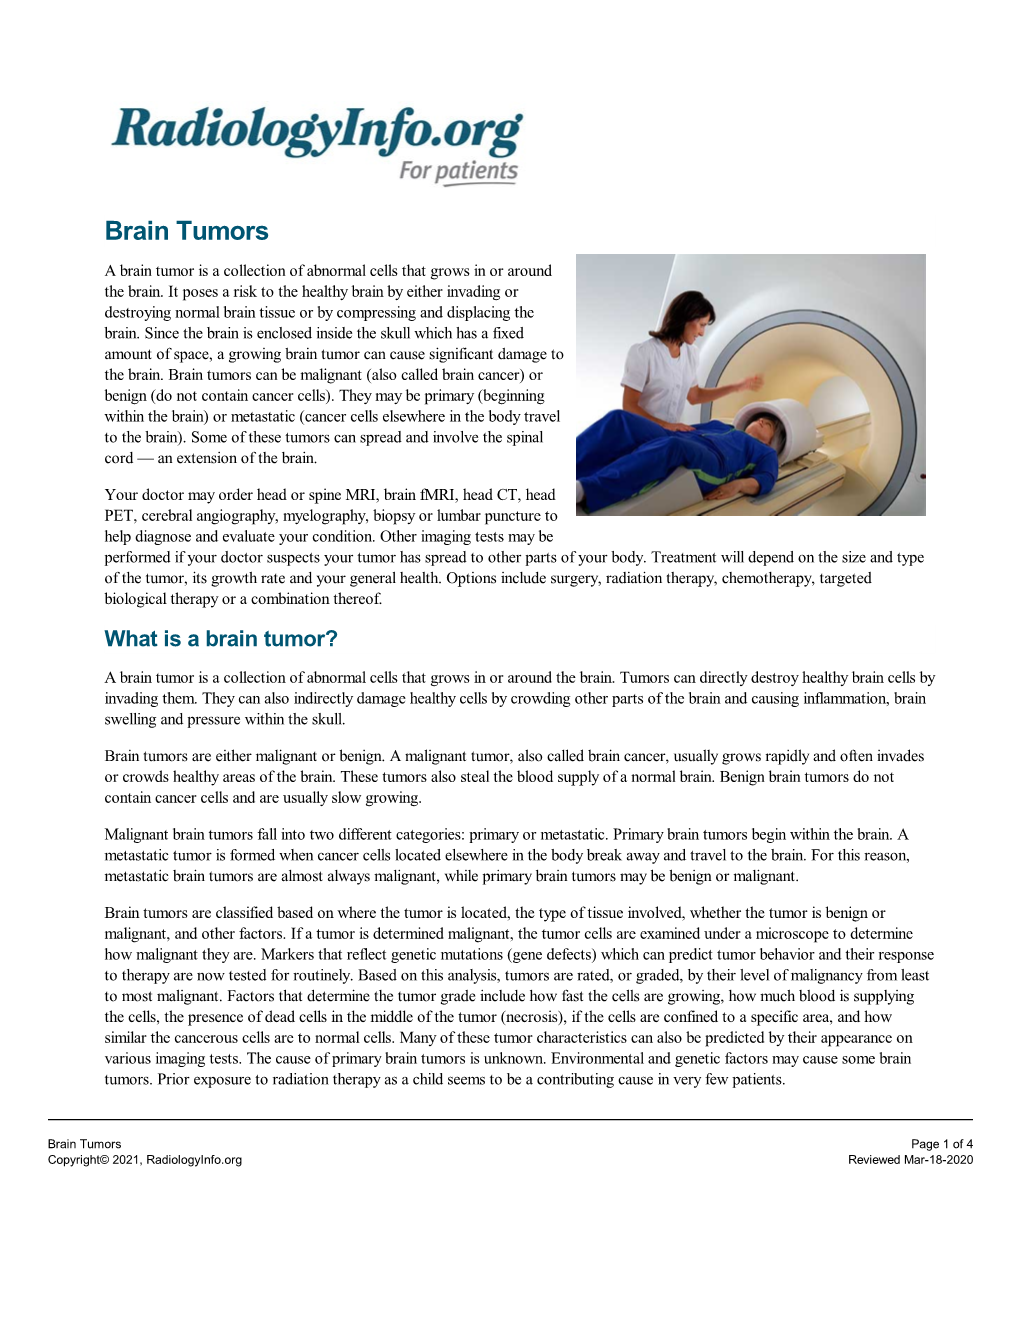 Brain Tumors a Brain Tumor Is a Collection of Abnormal Cells That Grows in Or Around the Brain